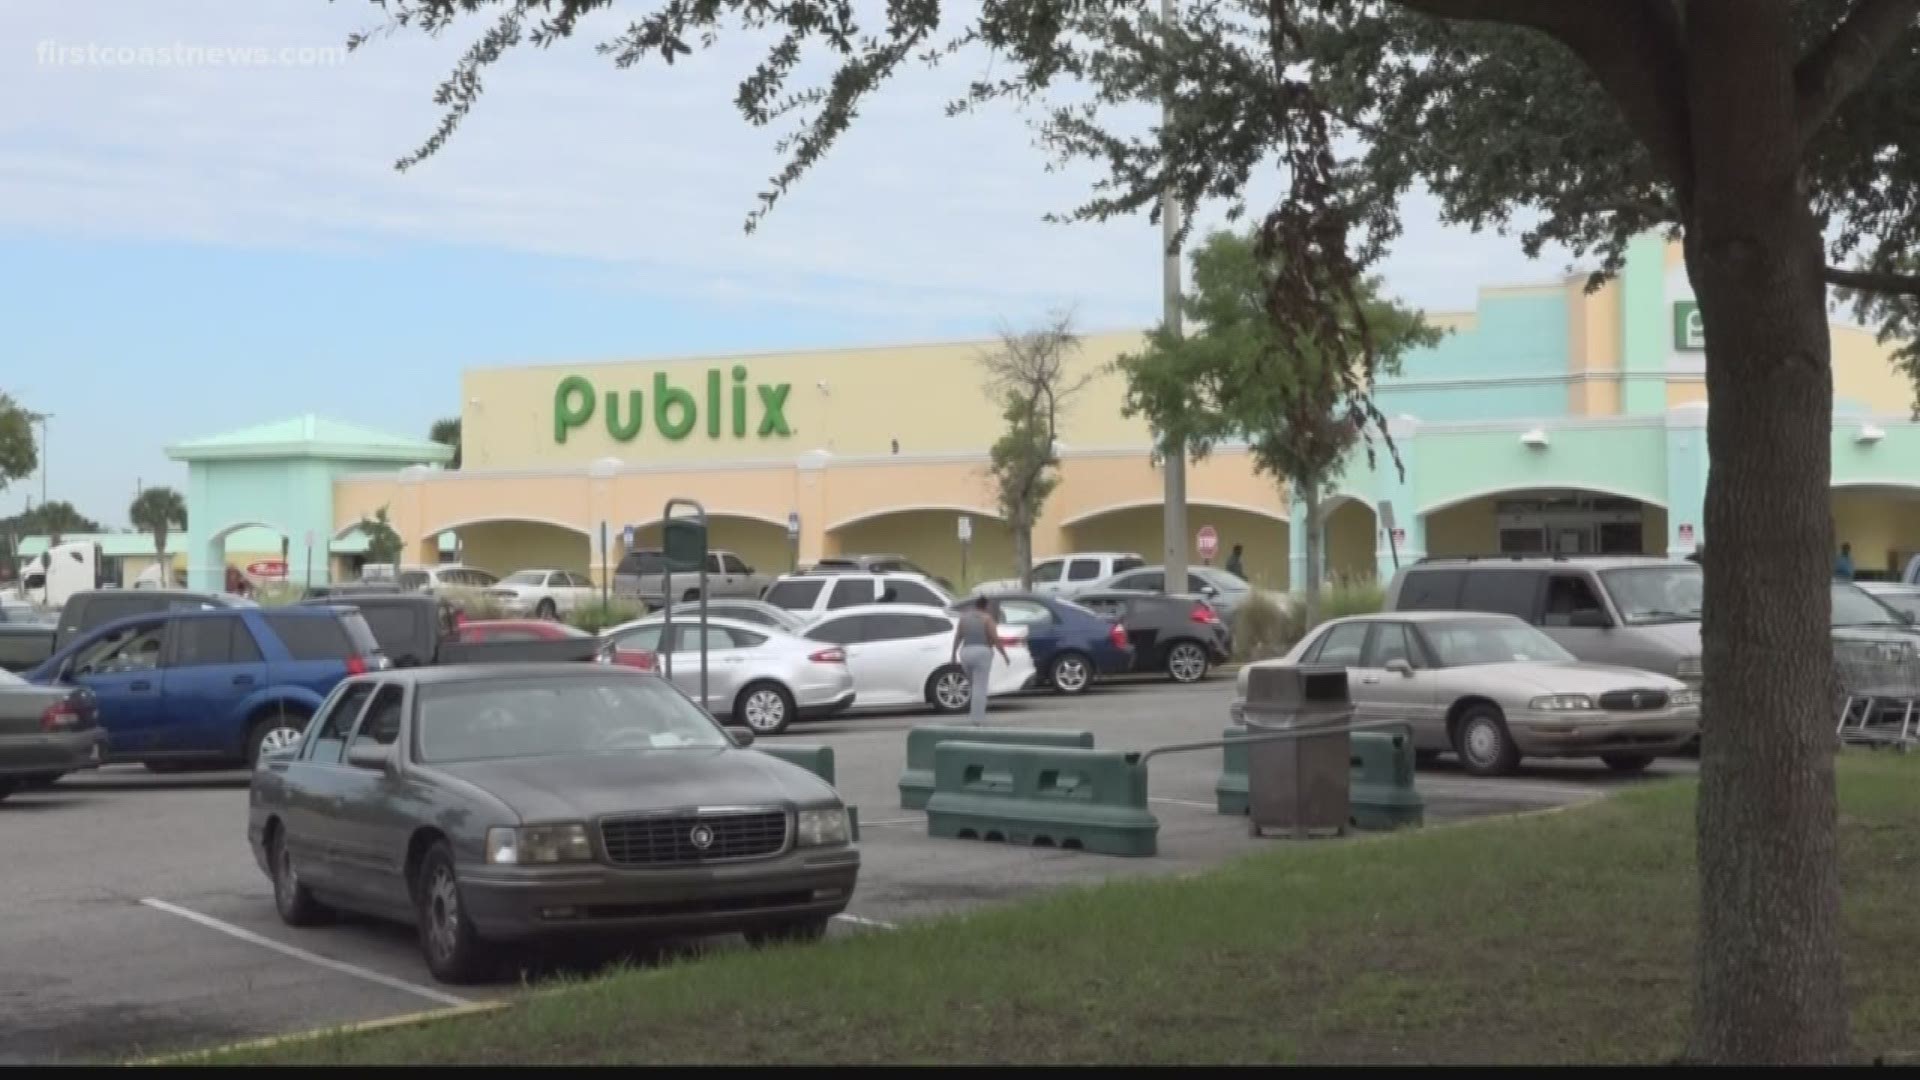 The loss of the Publix shopping center could create a food desert for residents in the Brentwood area.